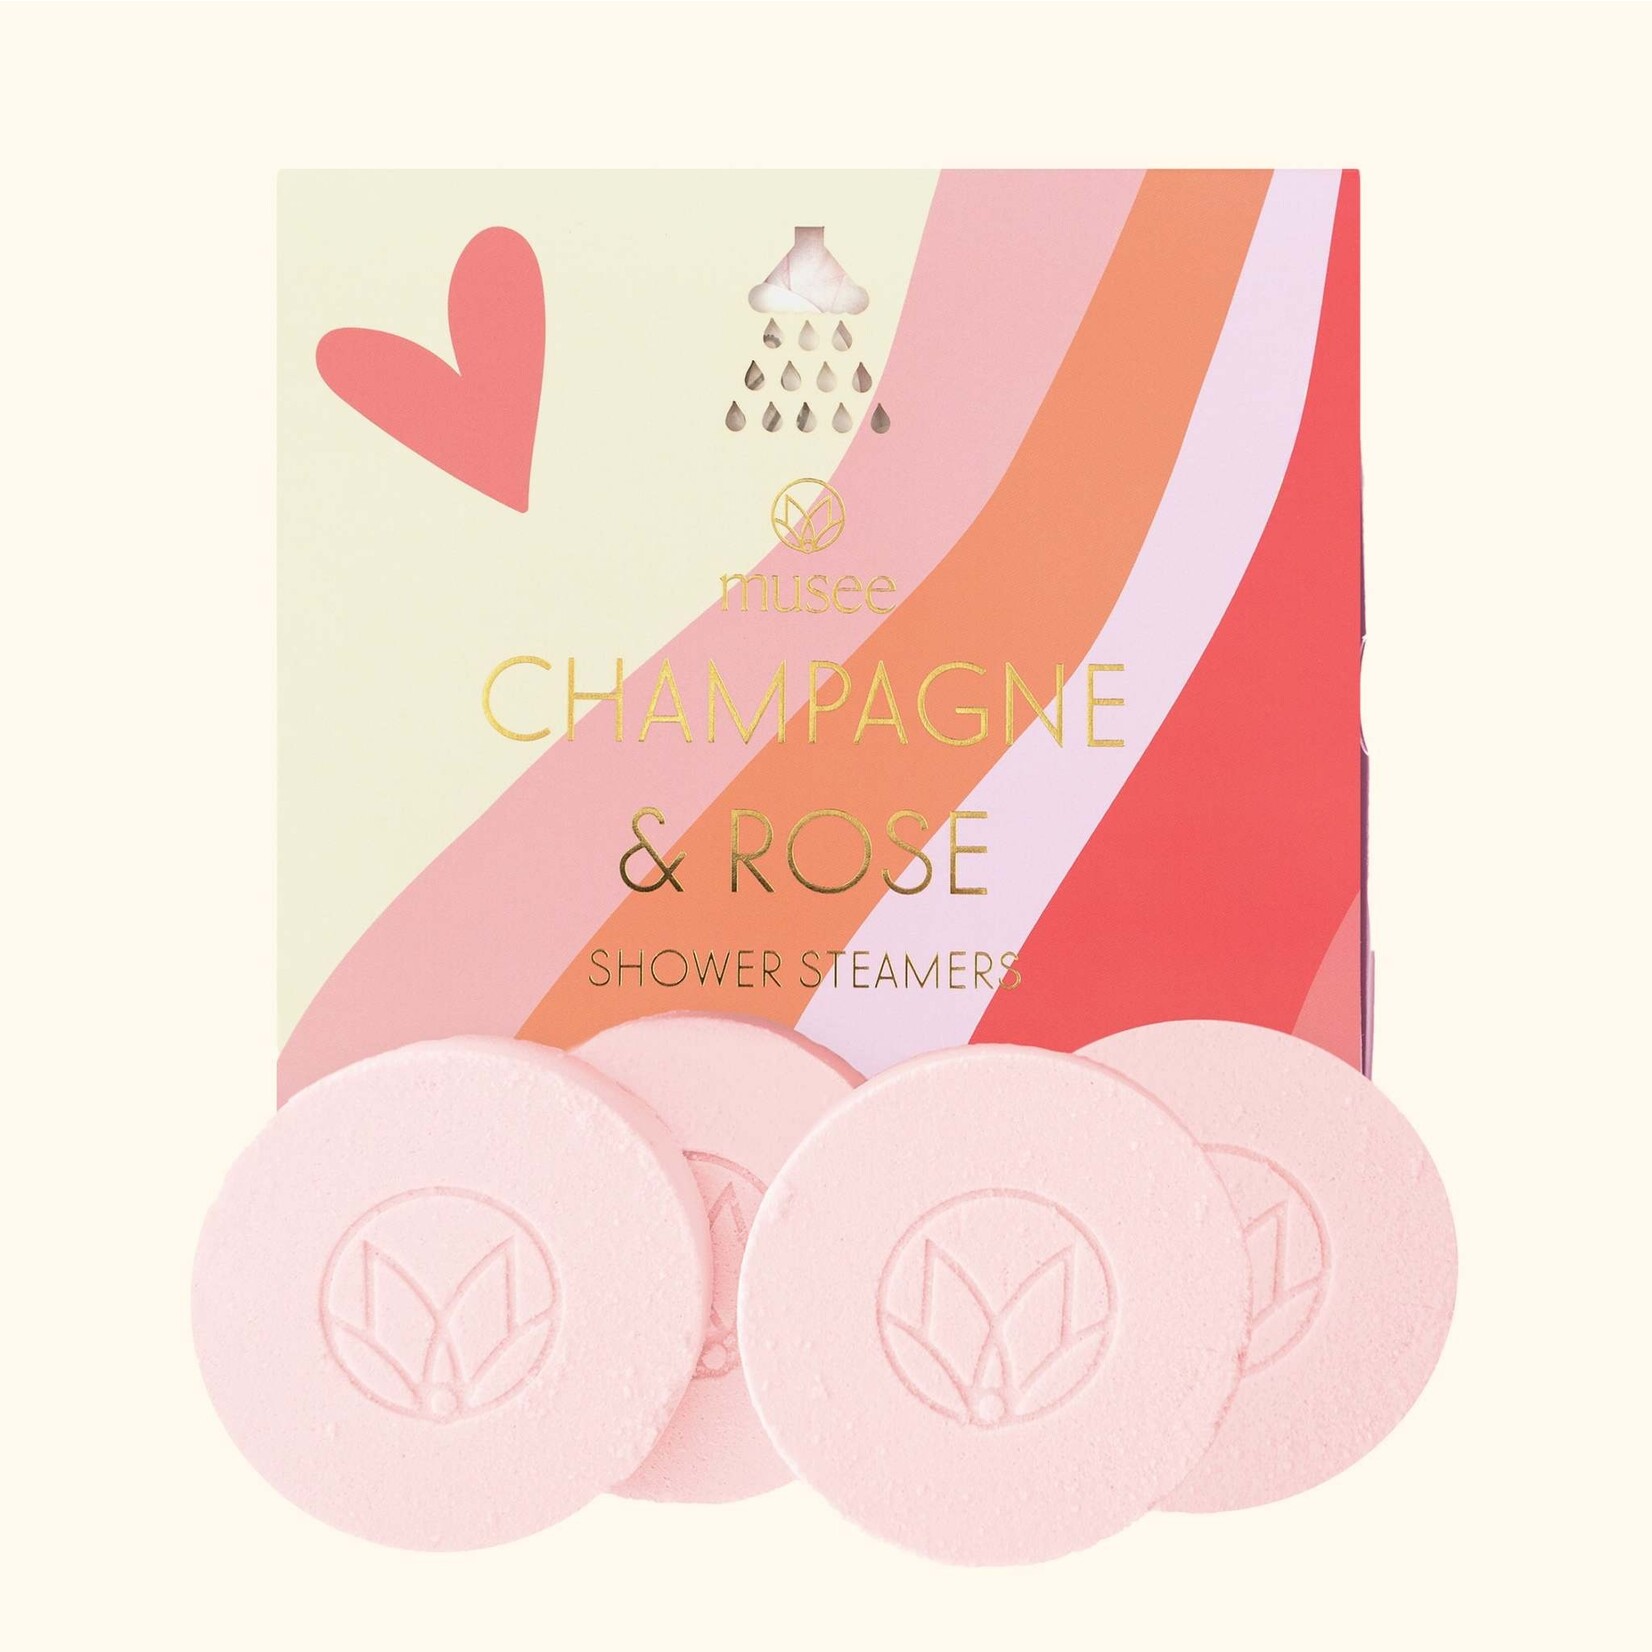 Musee Champagne and Rose Shower Steamers